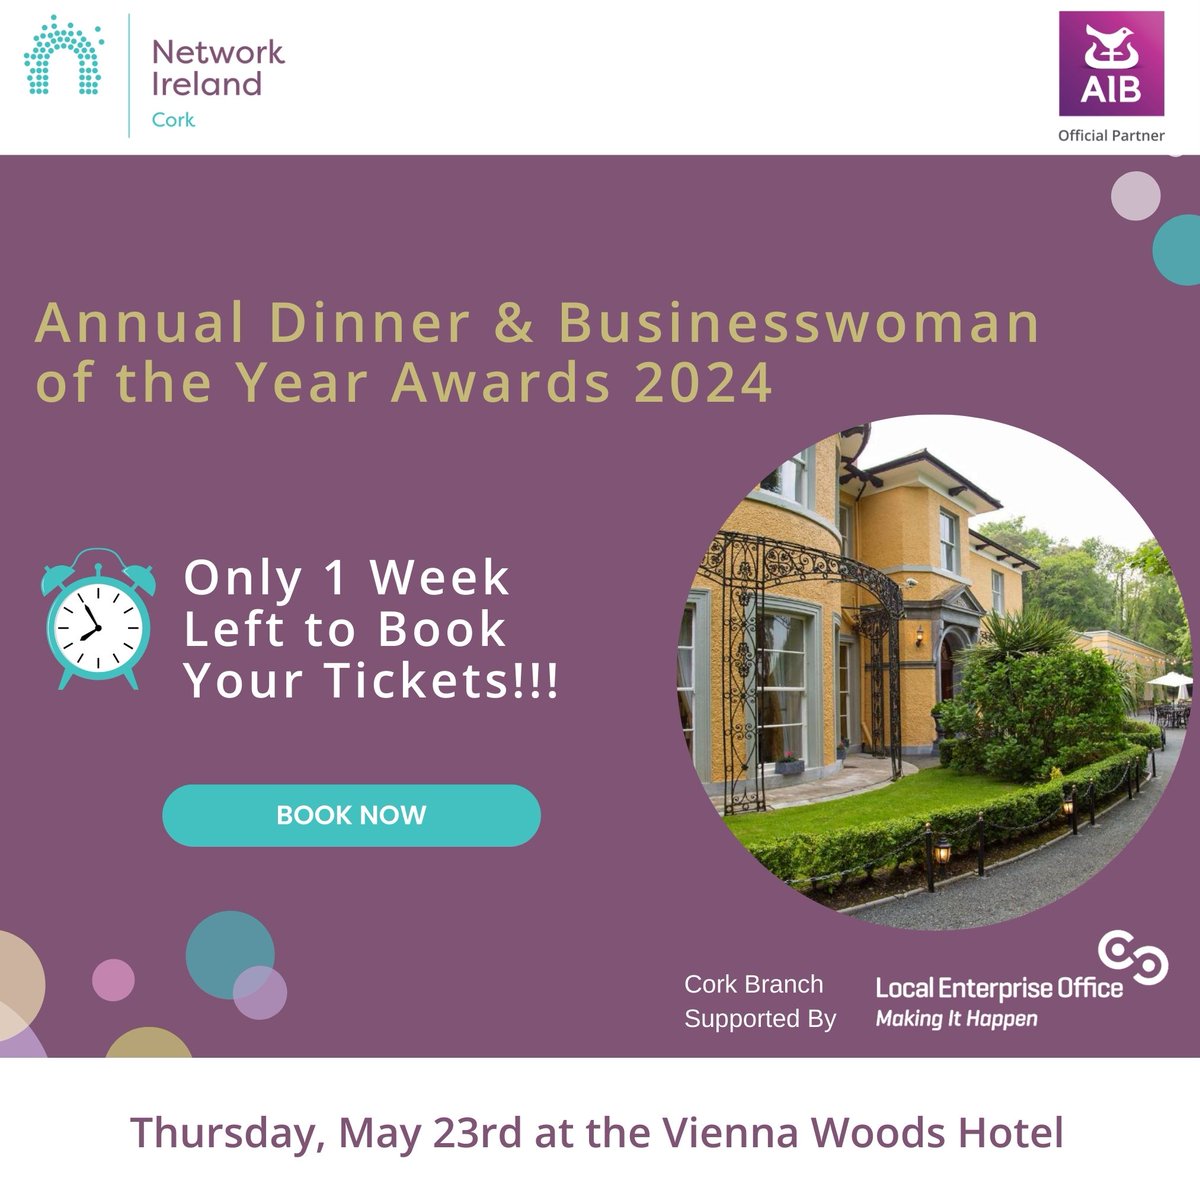 ⏳ Just one week left to secure your tickets for the 2024 Businesswoman of the Year Awards! 🎟️ Book Now: bit.ly/44hfBkv #NetworkIreland #NetworkCork #supportedbyAIB #OneWeekLeft